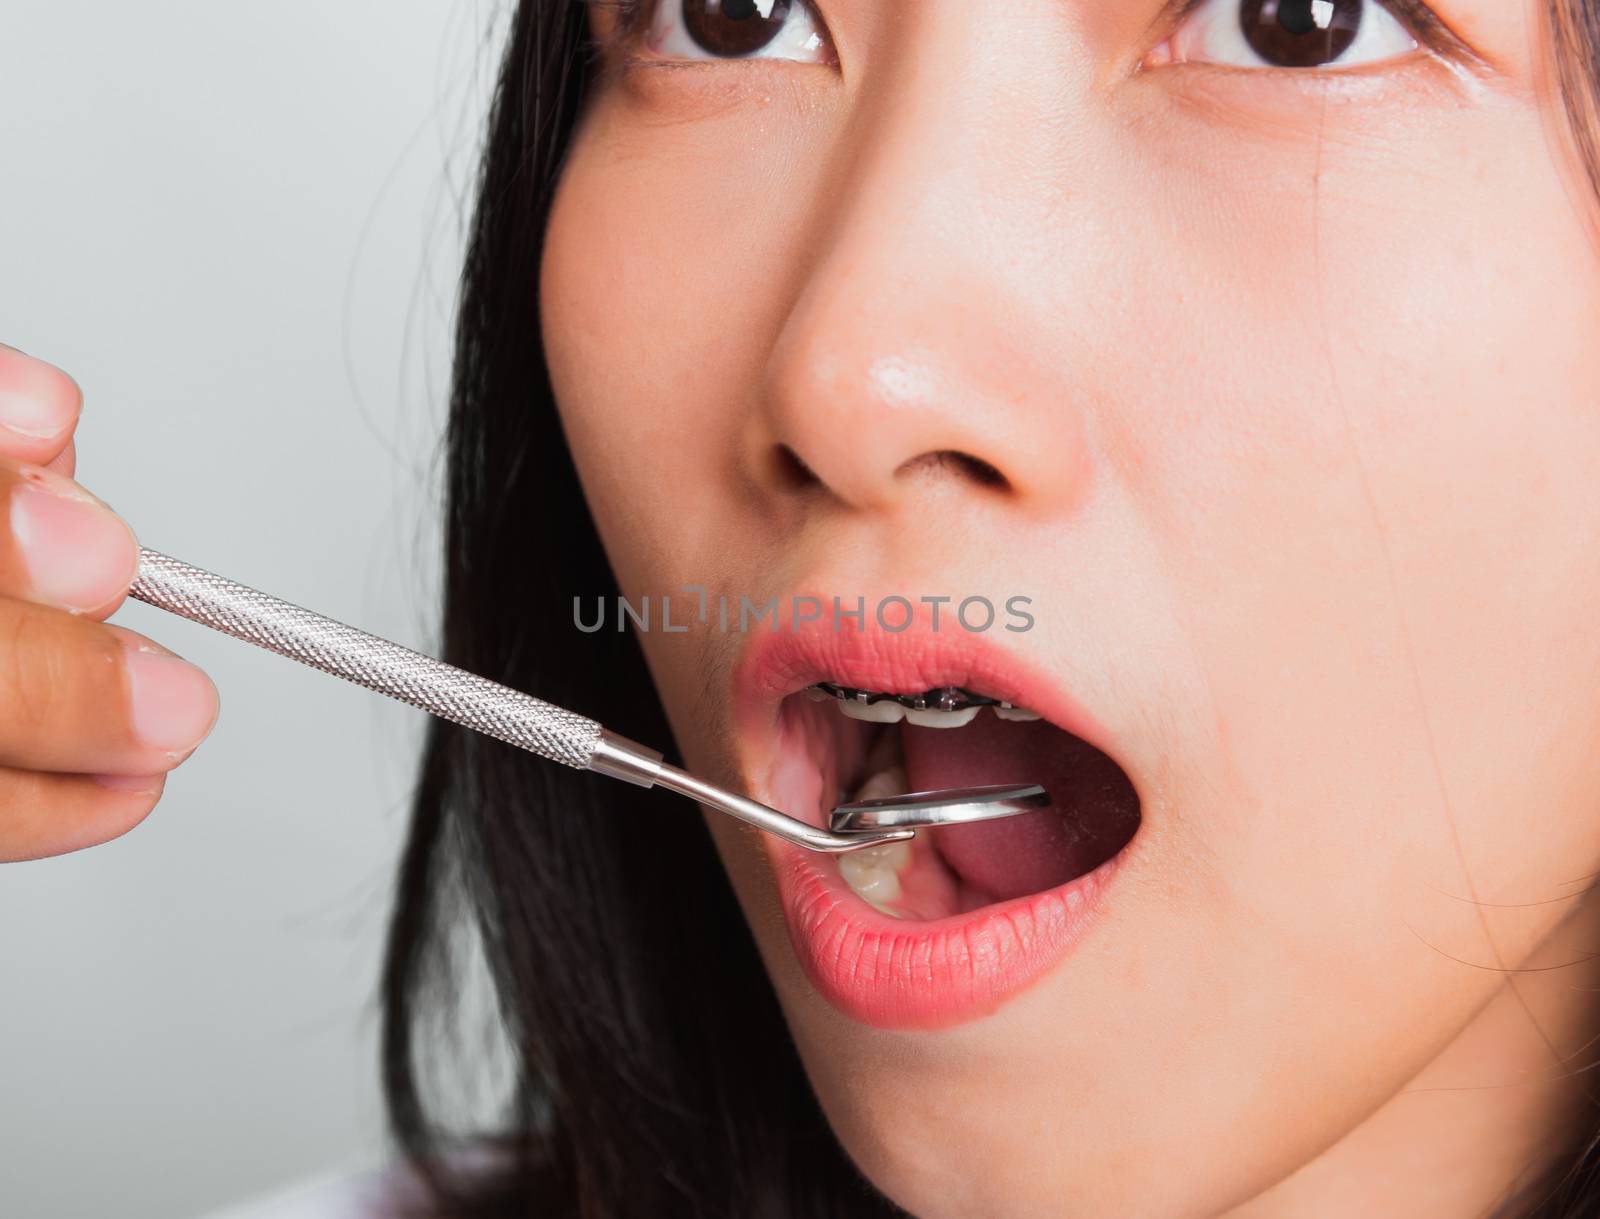 Asian teen beautiful young woman smile have dental braces on teeth laughing and have medical equipment tools for check tooth, isolated on a white background, Medicine and dentistry concept